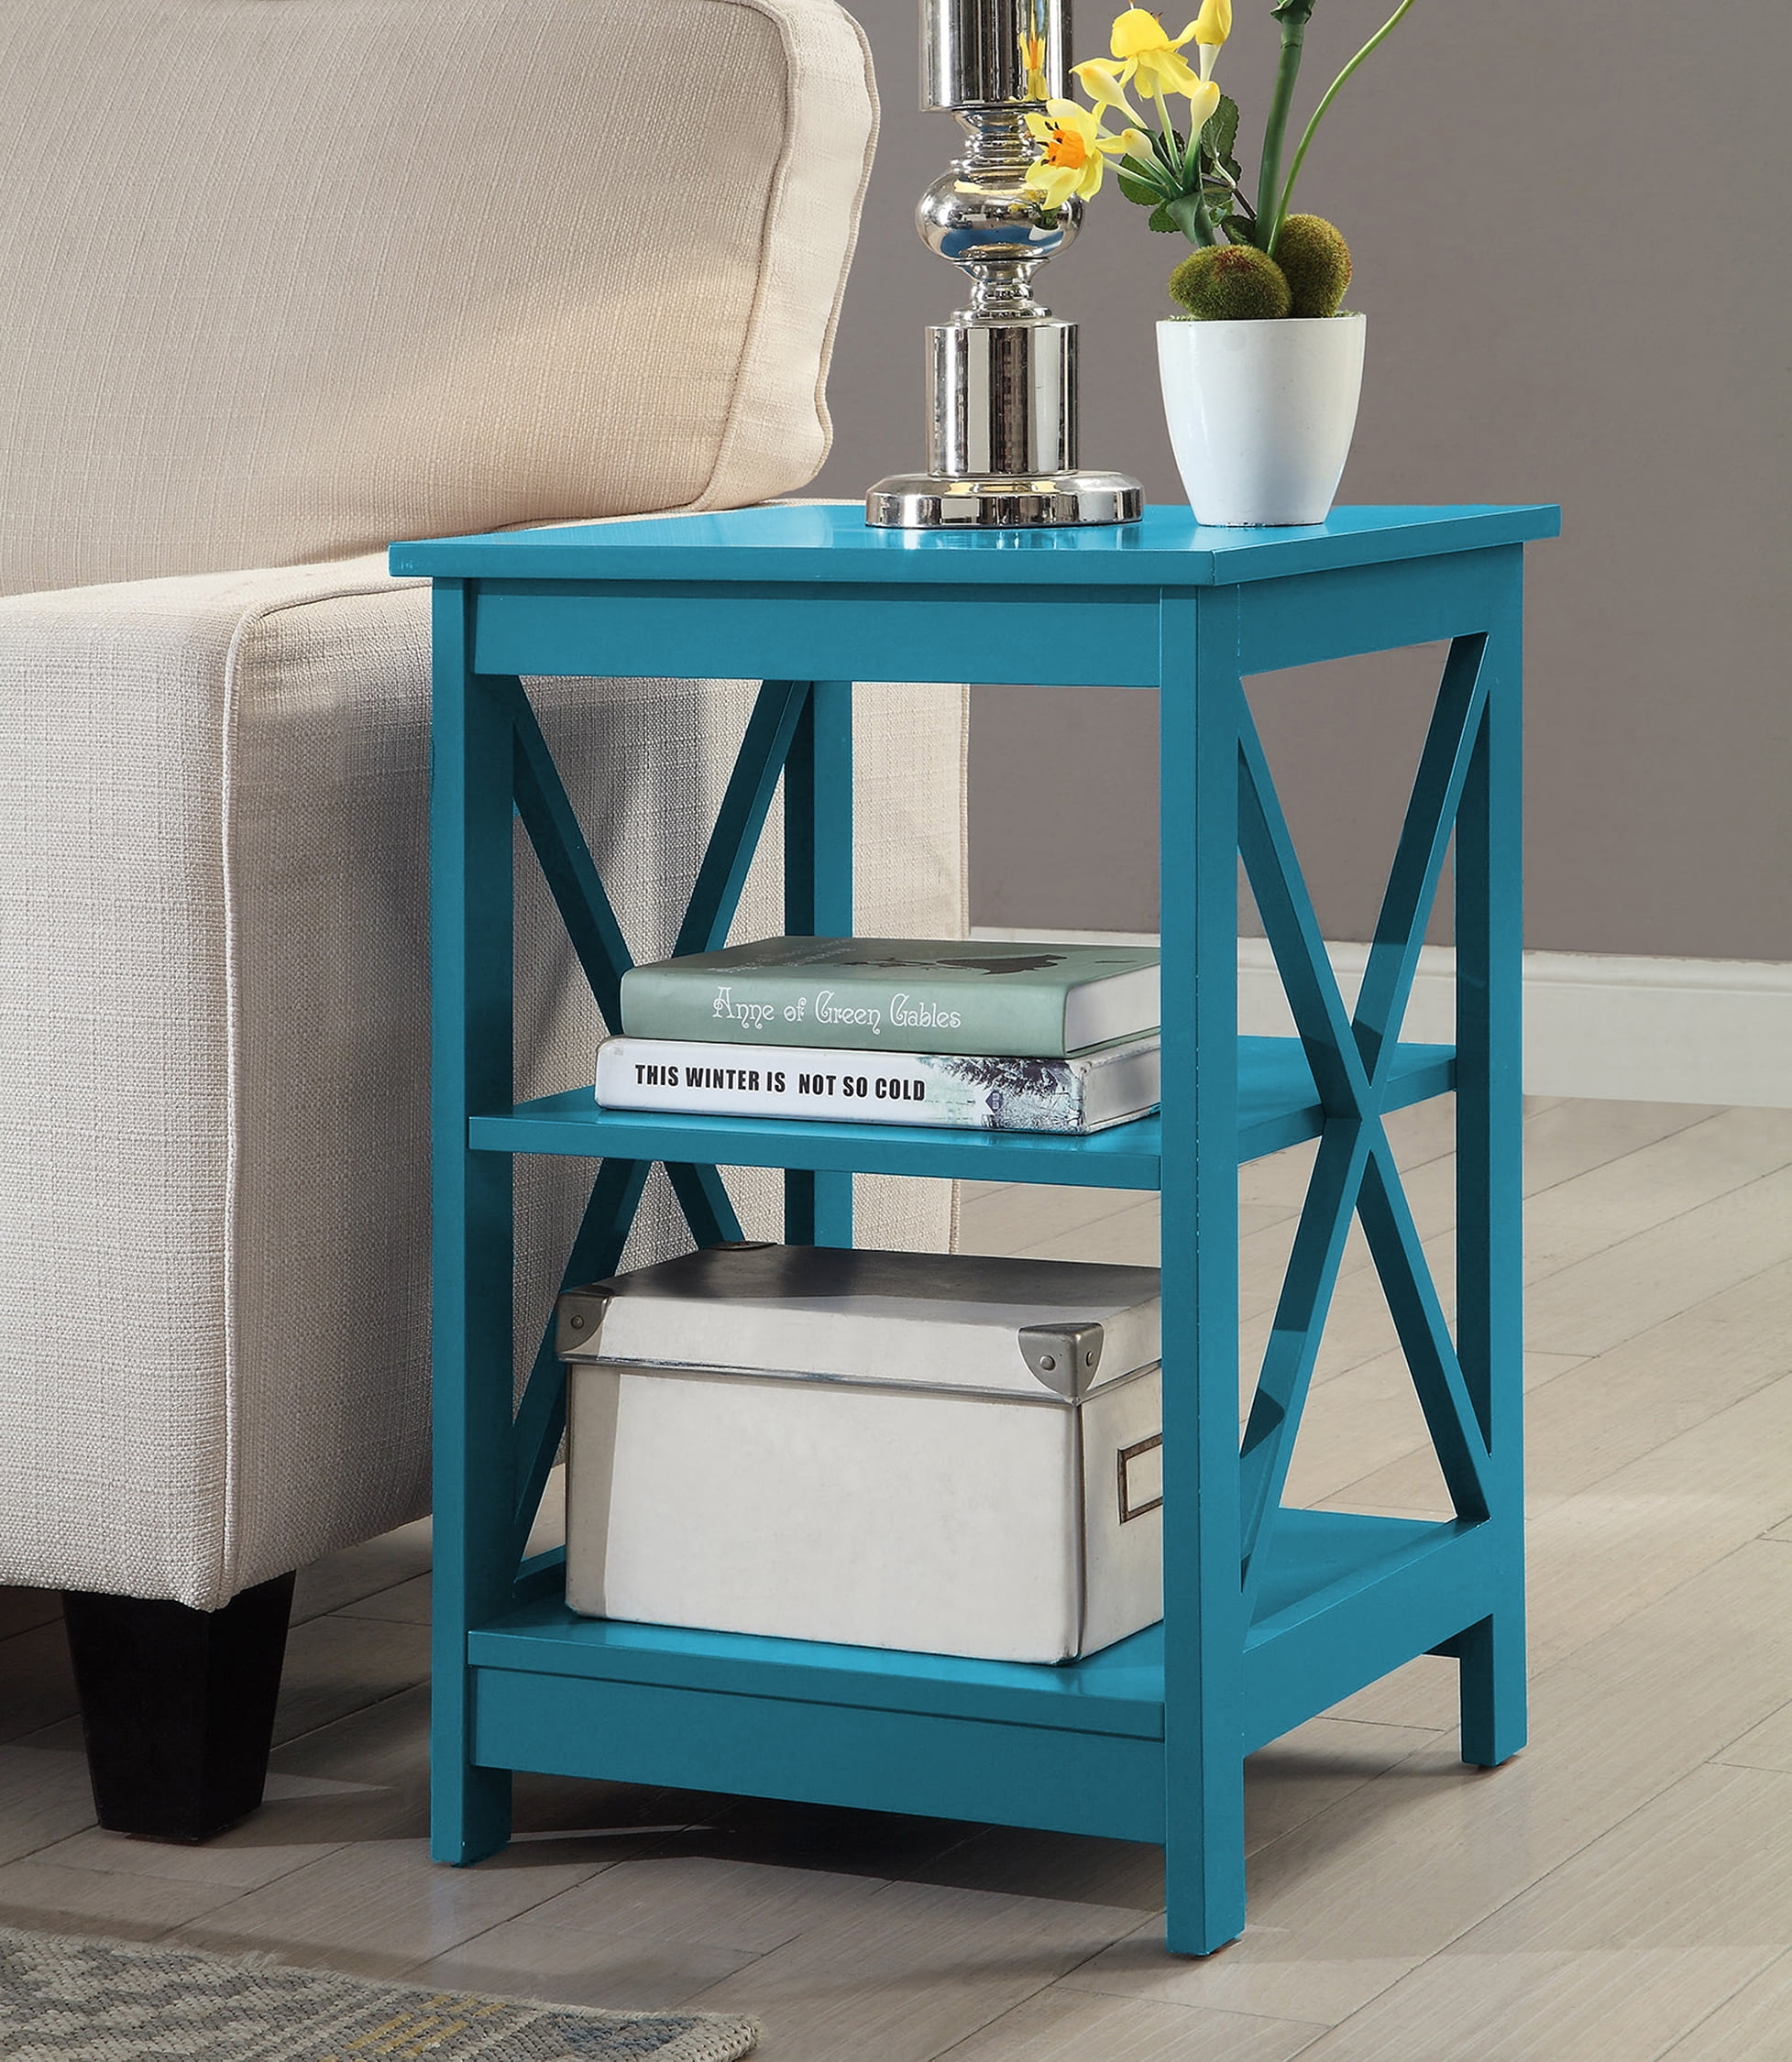 203085be End Table, Blue - 15.75 X 15.75 X 24 In.